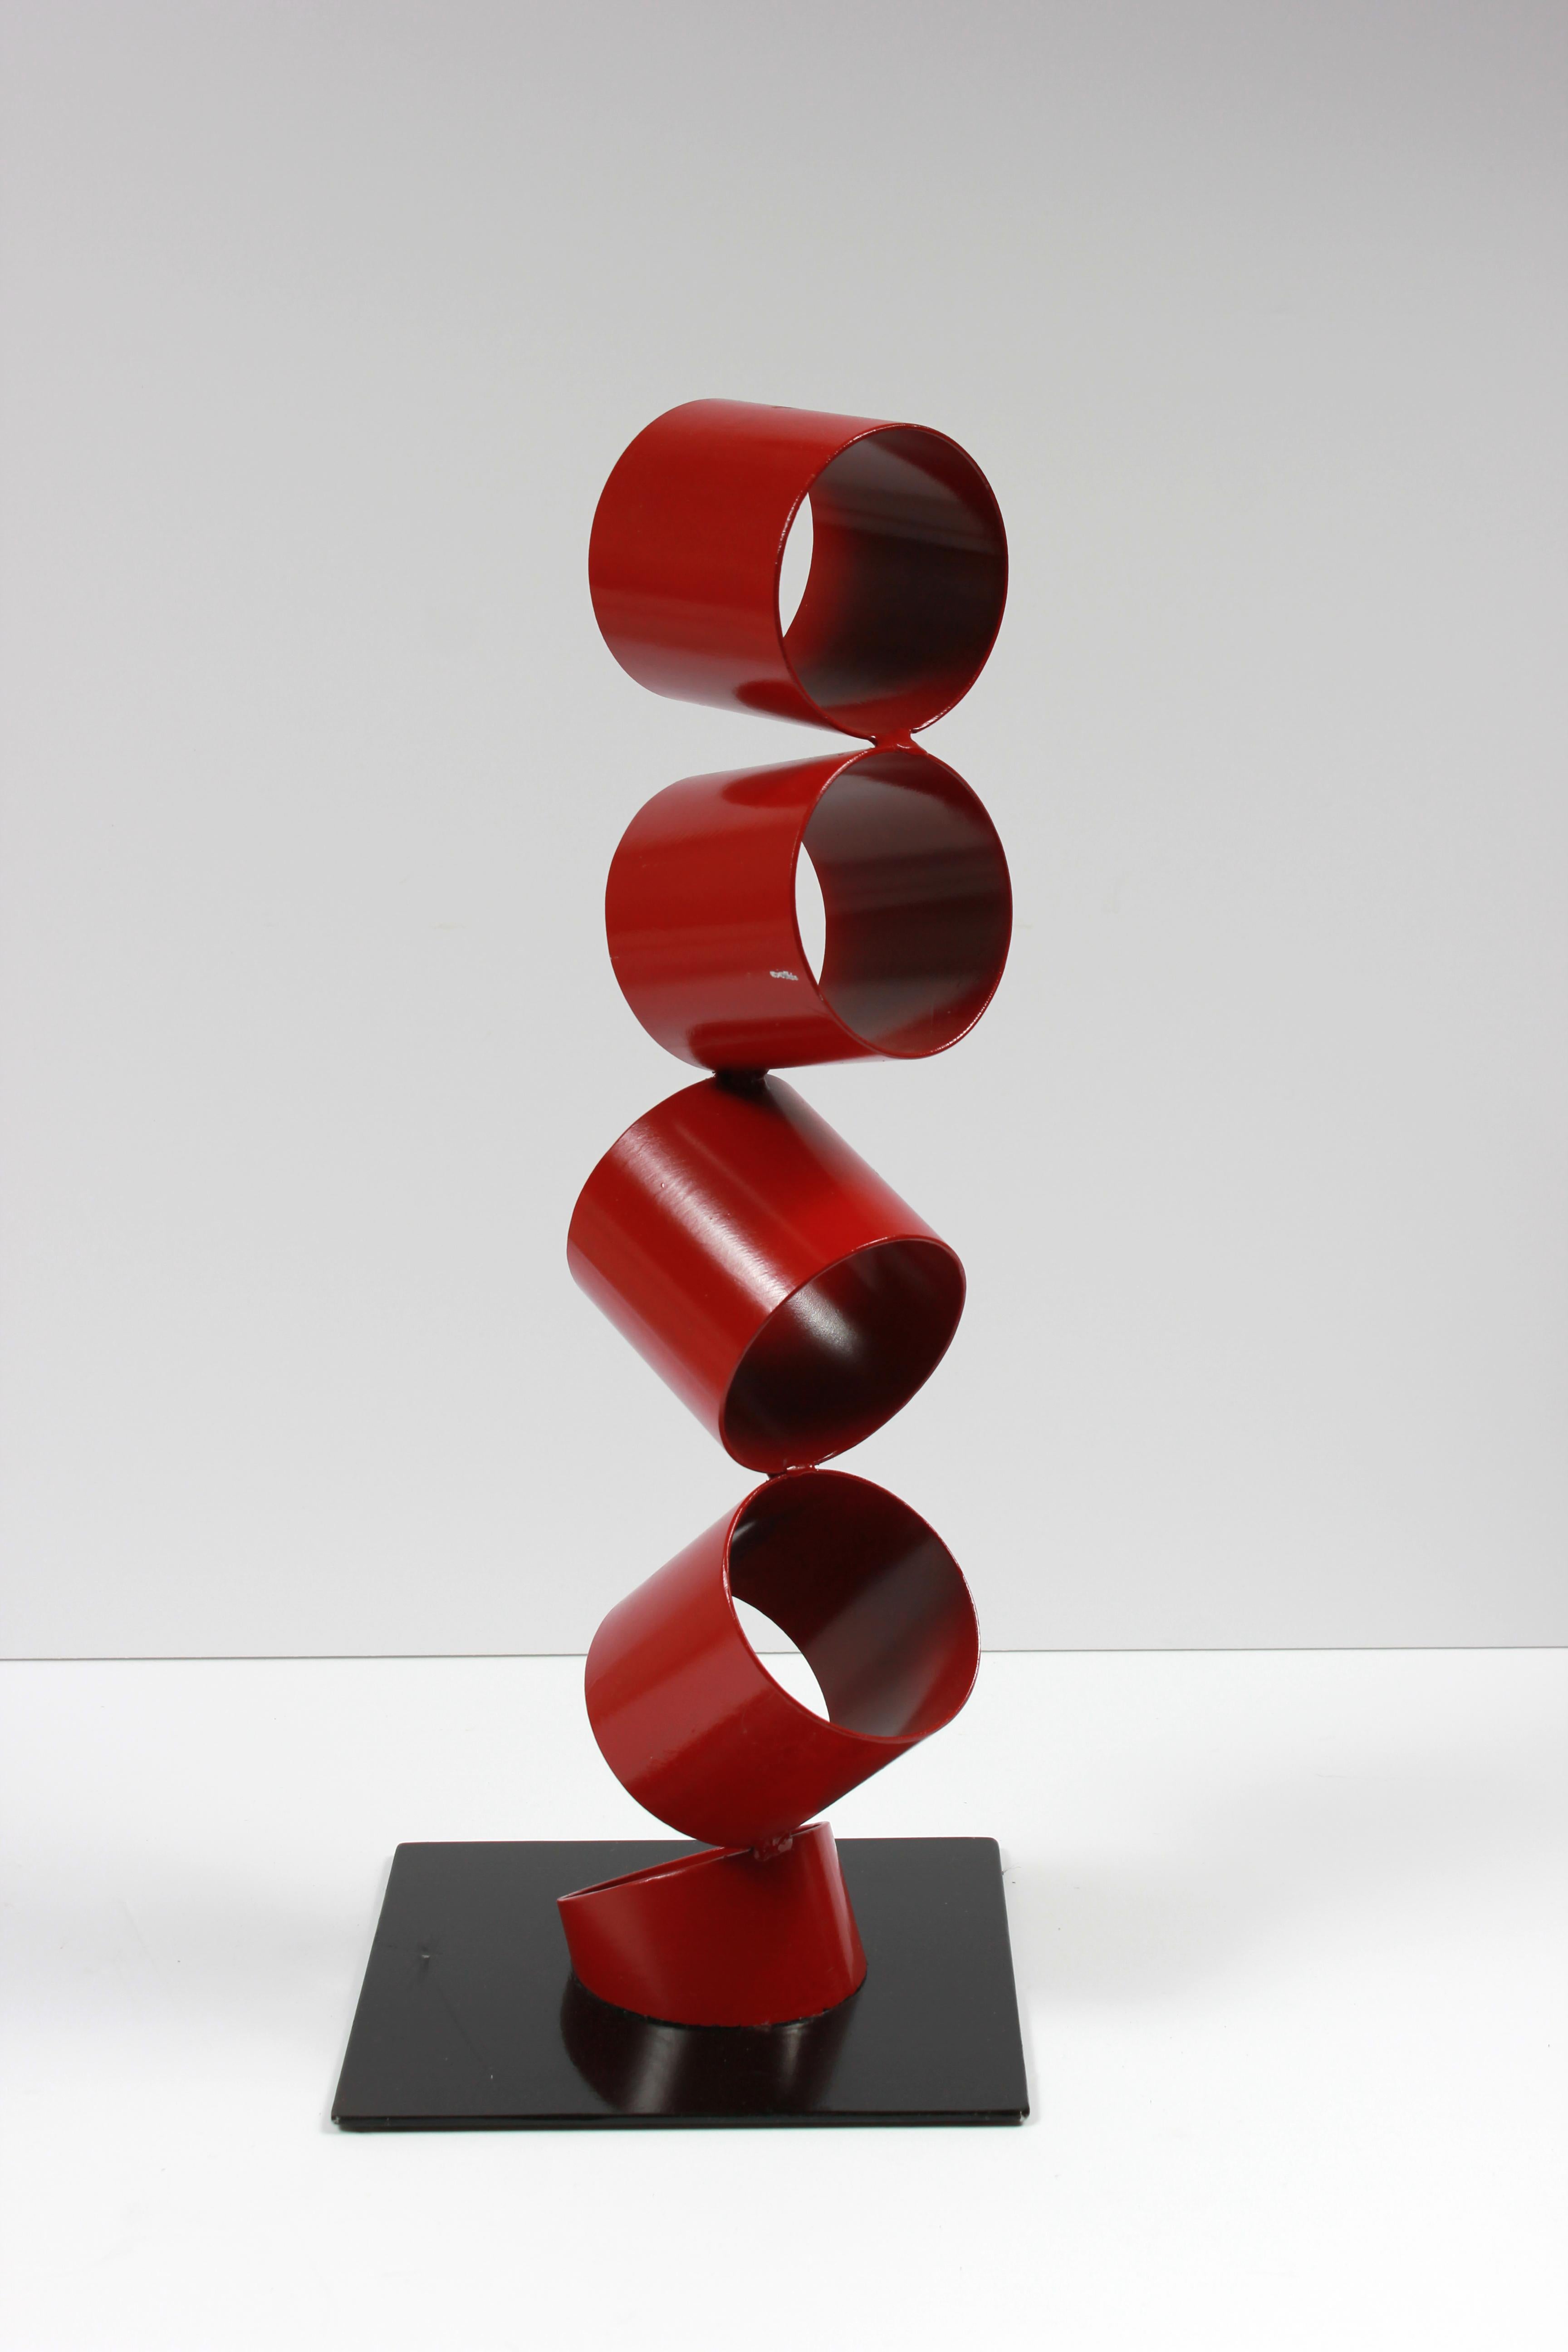 Multimedia Metal Sculpture of Six Red Rings in an Angled Stack 1